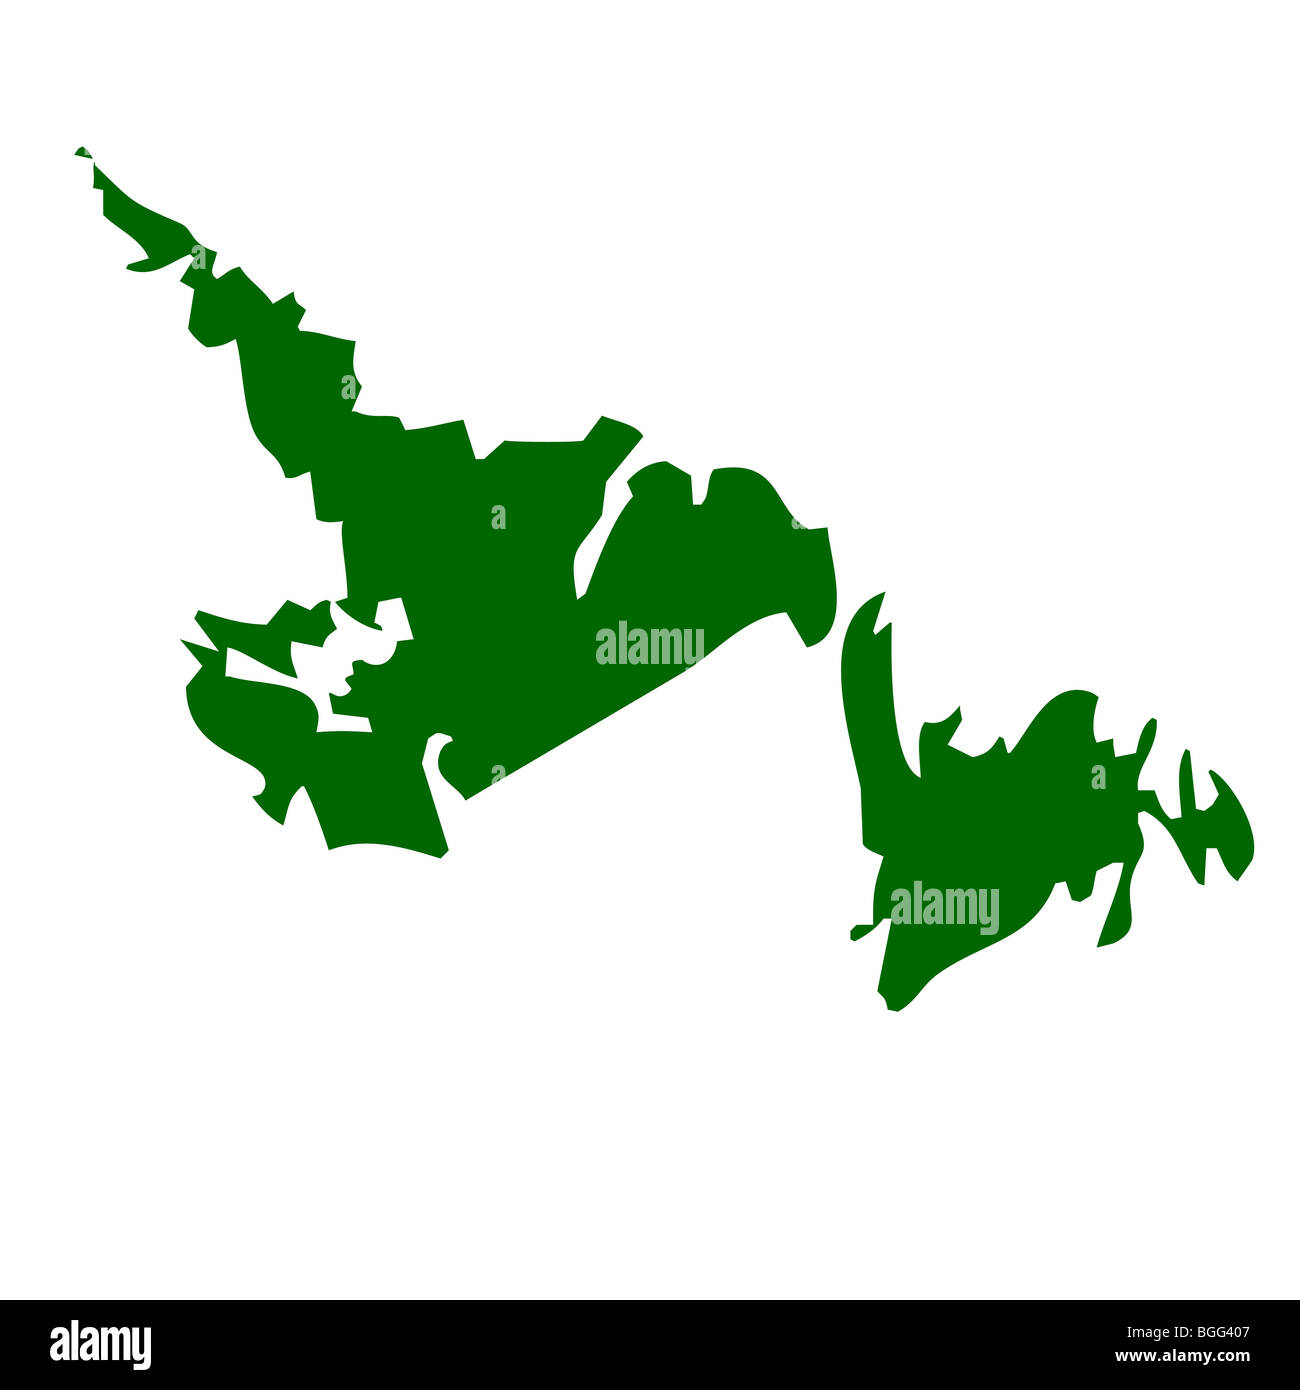 Map of Newfoundland province or territory in Canada, isolated on white background. Stock Photo